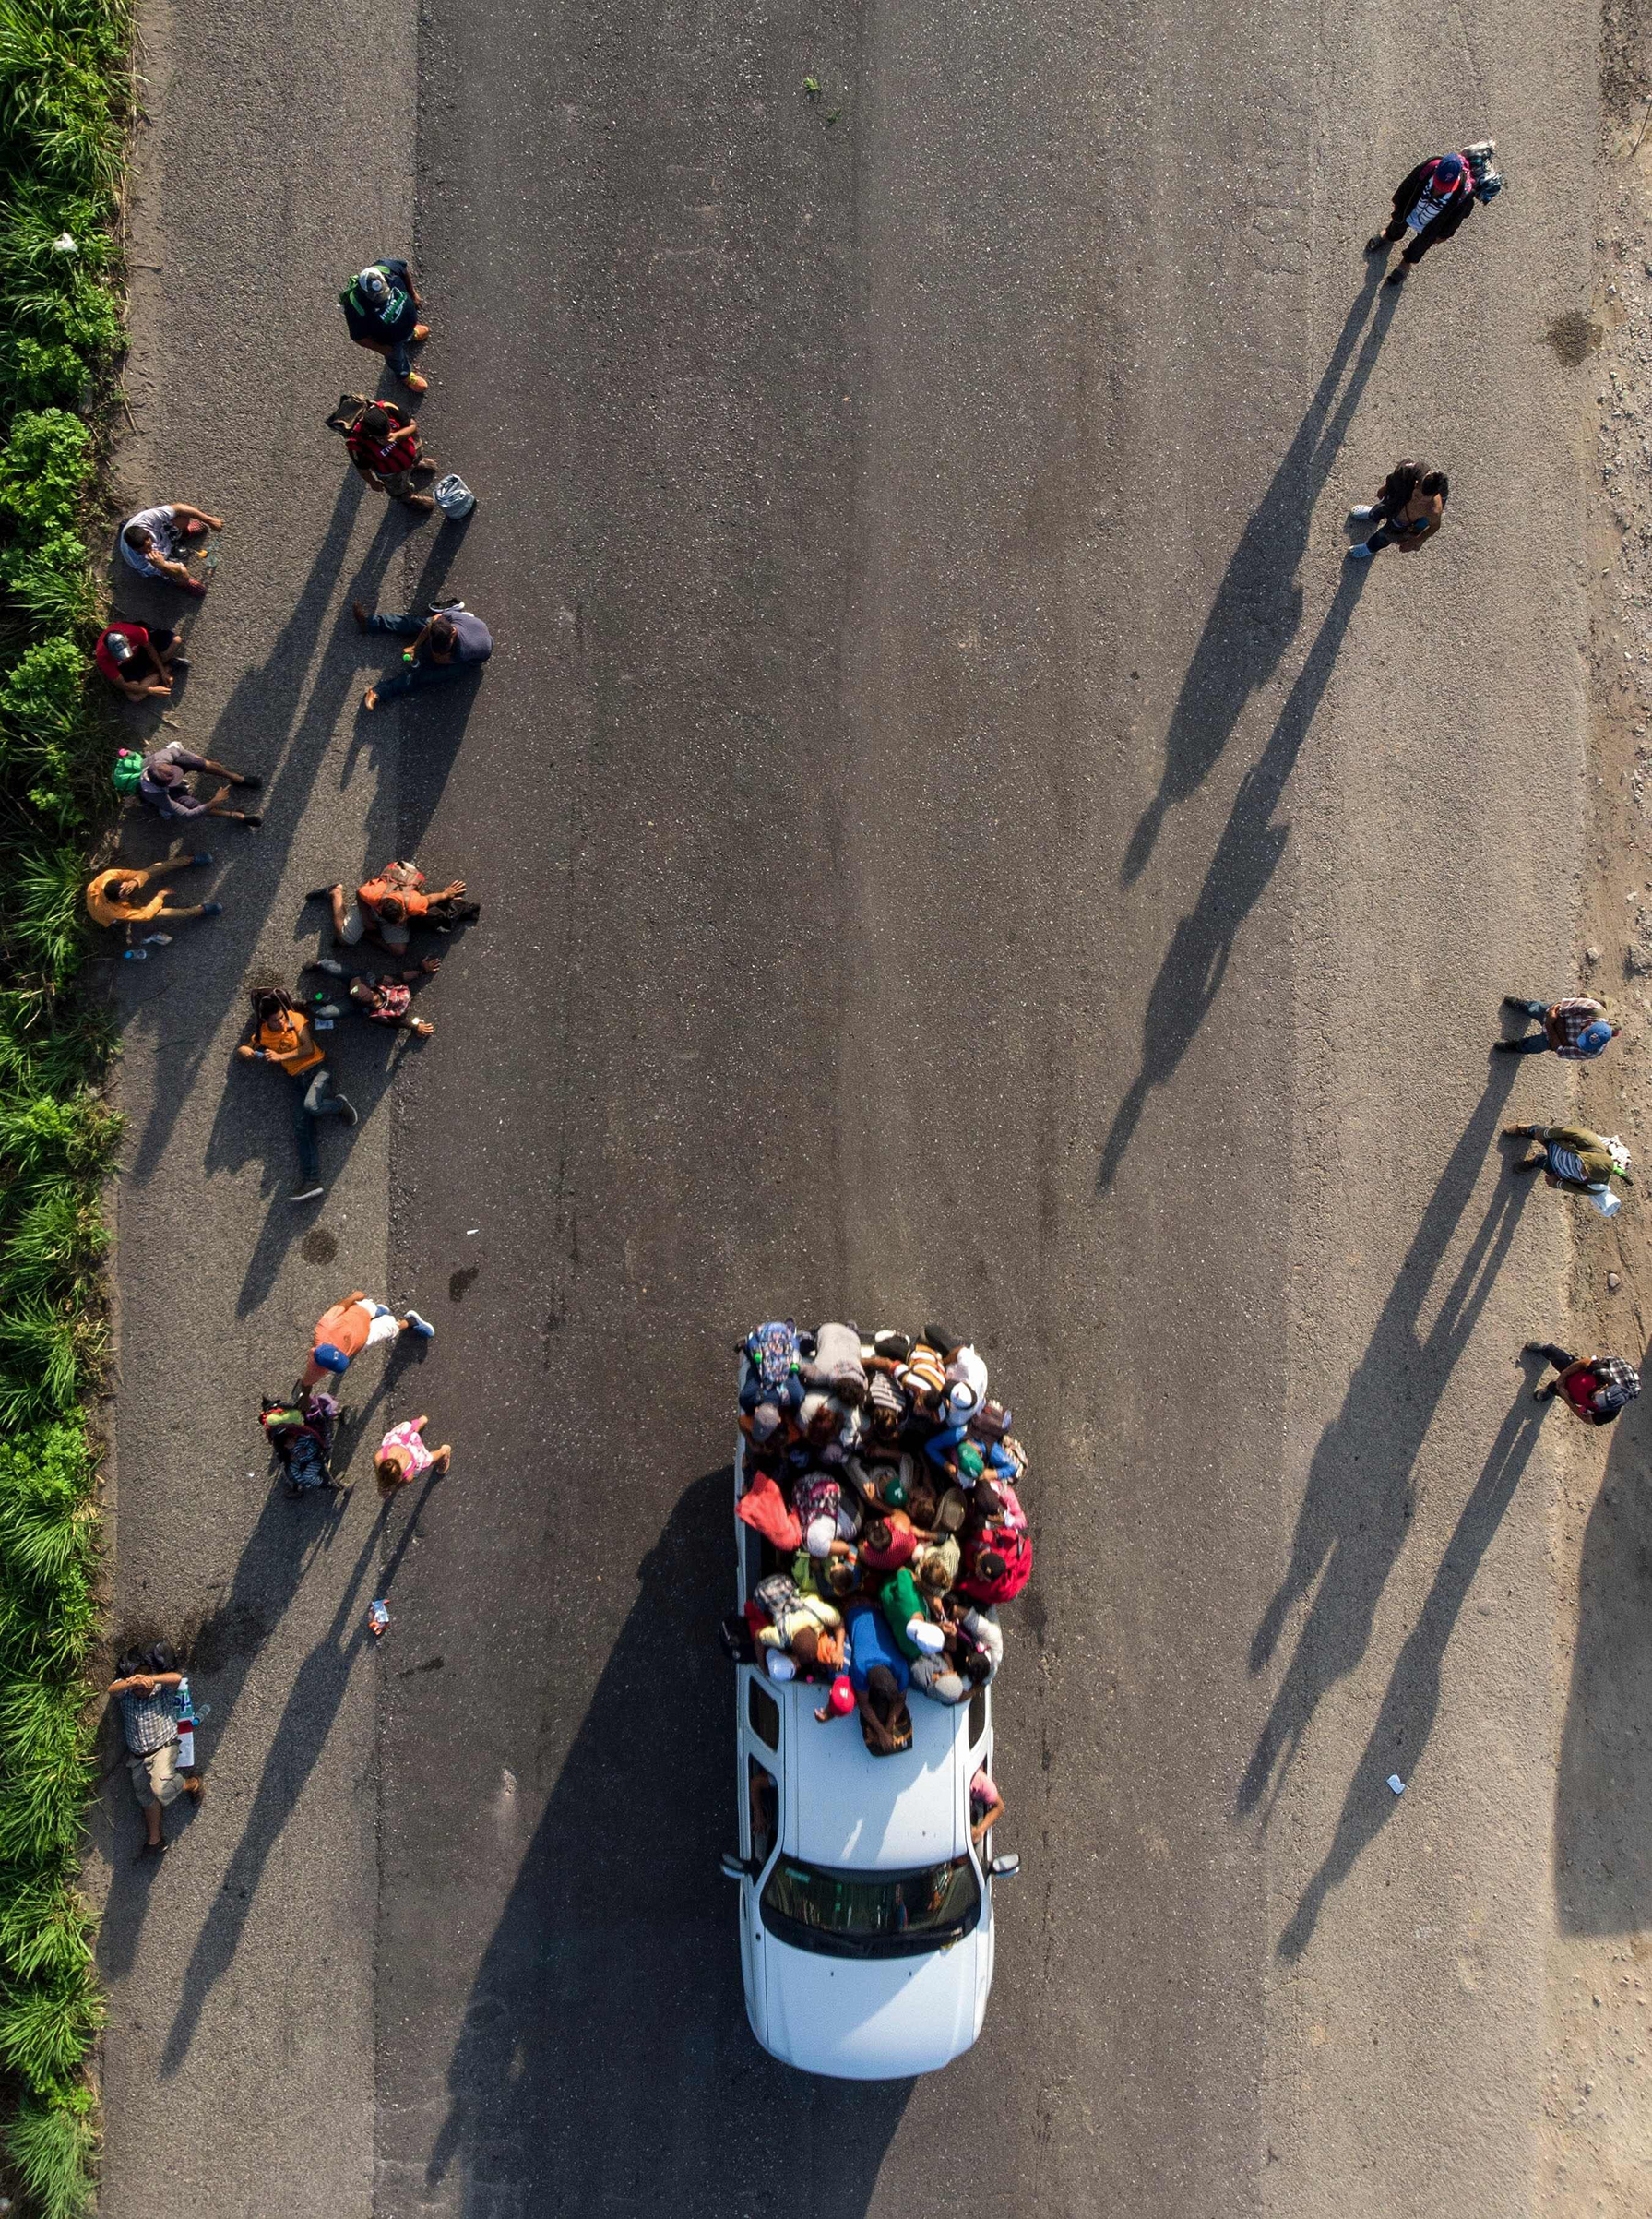 Honduran migrants, part of a caravan to the U.S., resume their march in Oaxaca State, Mexico, on Oct. 29